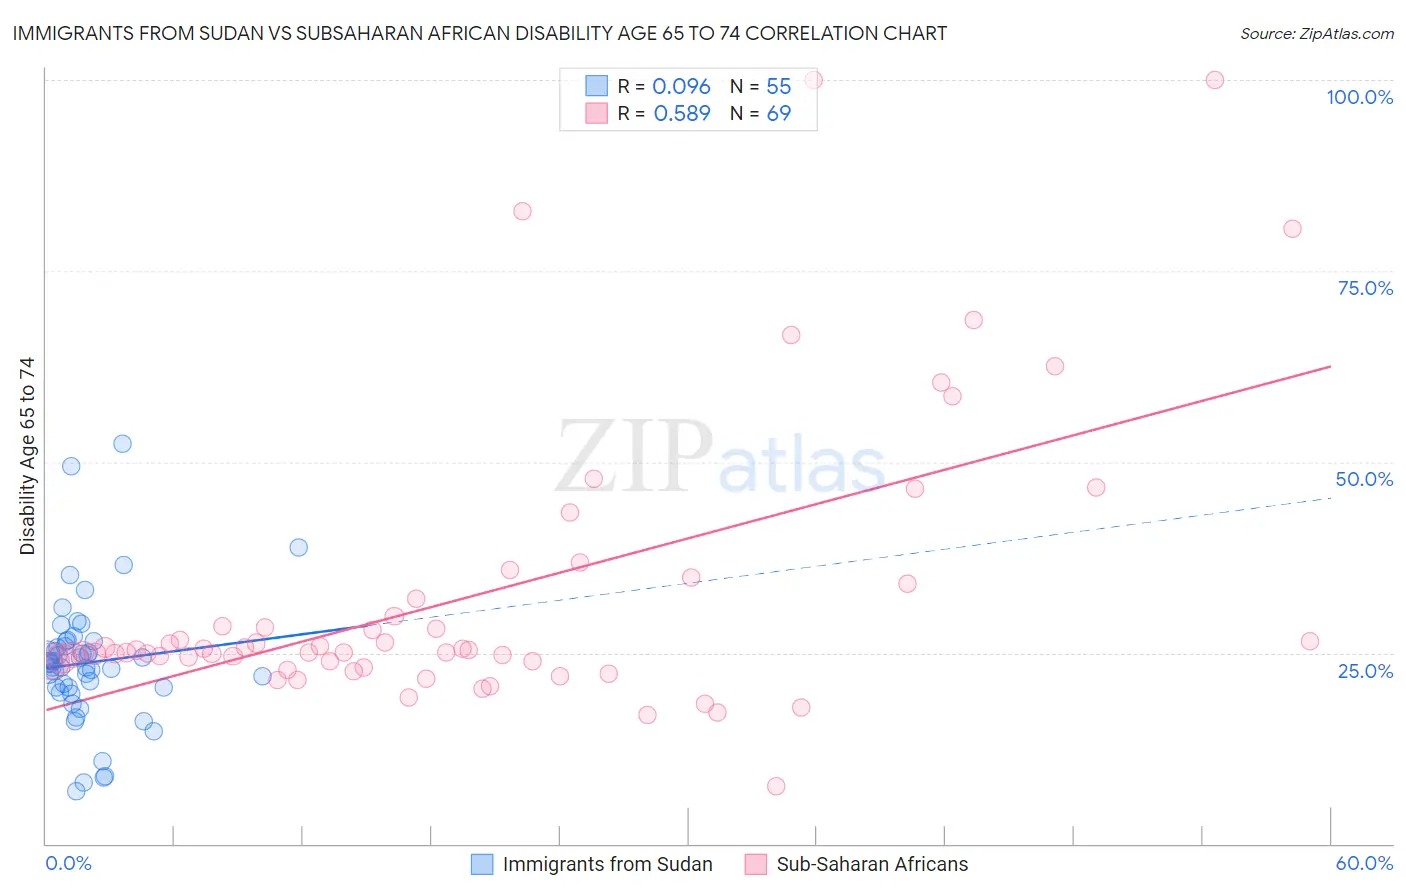 Immigrants from Sudan vs Subsaharan African Disability Age 65 to 74